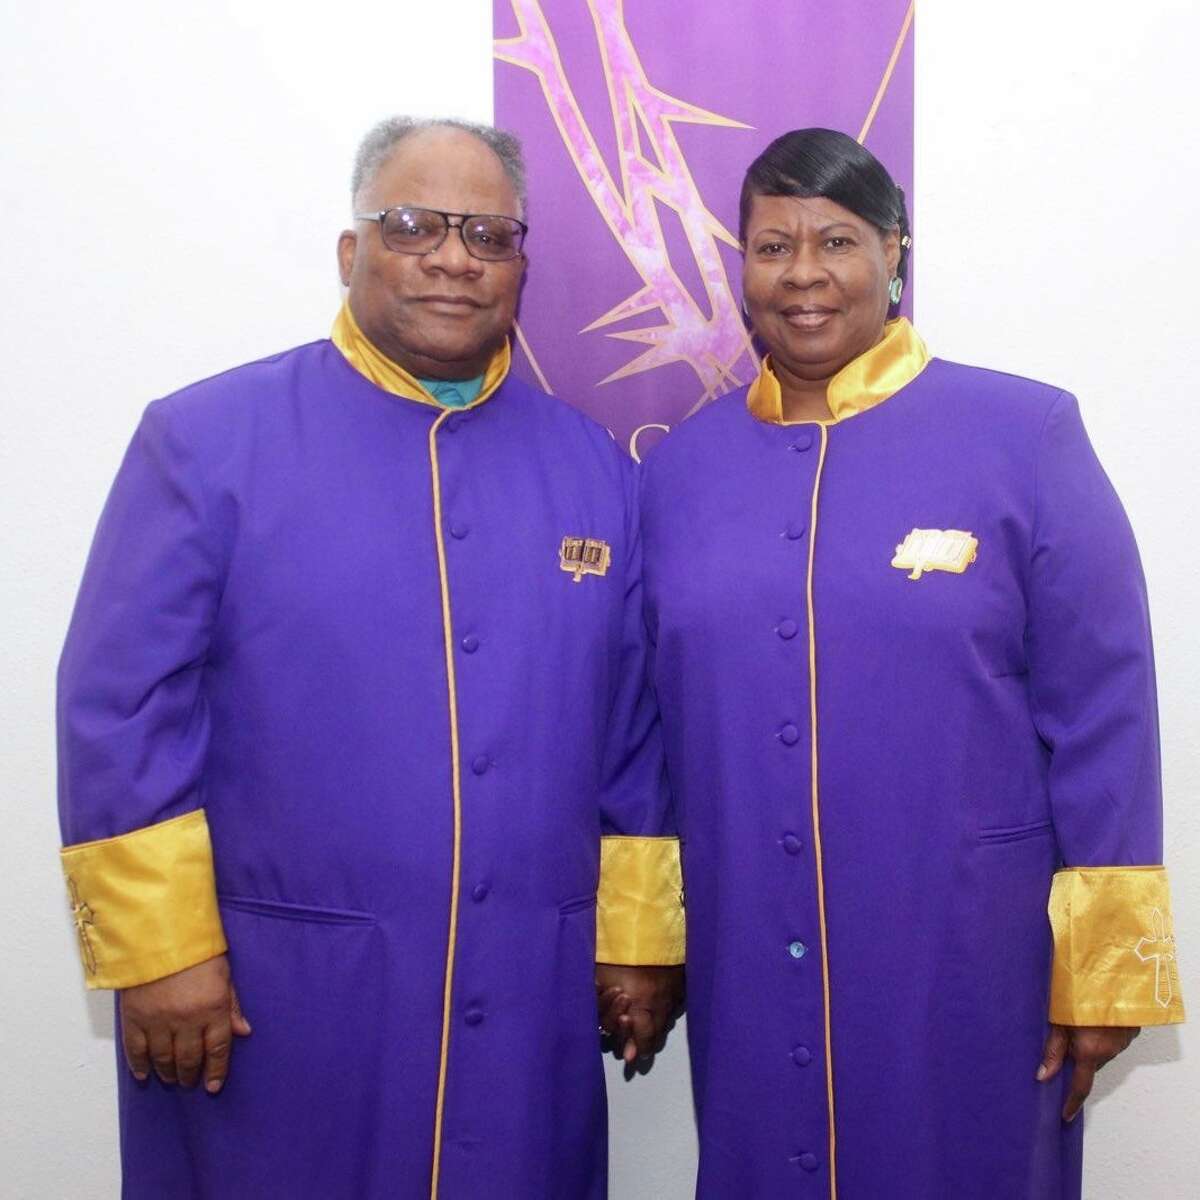 John Henry Williams and his wife, Linda Faye Williams, of New Shining Light Church will host a free chili and soup luncheon every Tuesday and Thursday from 11 a.m.-2 p.m. for the month of February